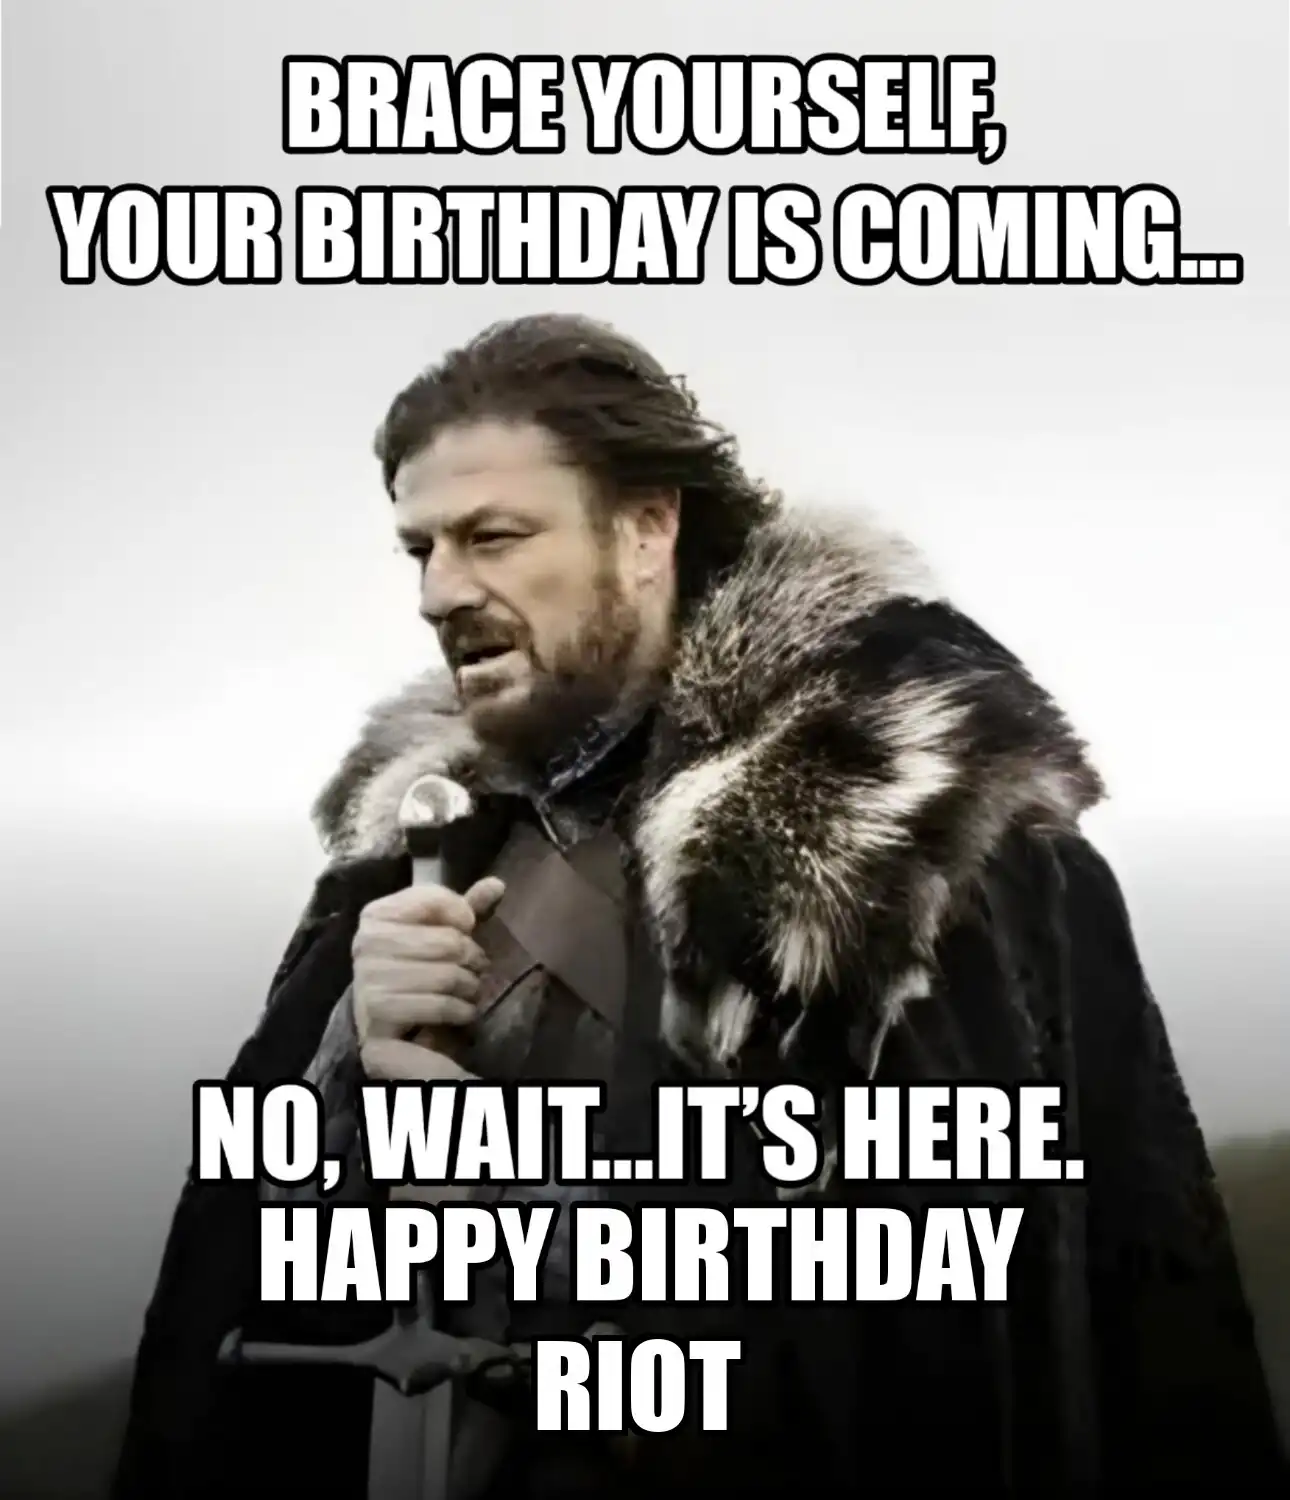 Happy Birthday Riot Brace Yourself Your Birthday Is Coming Meme